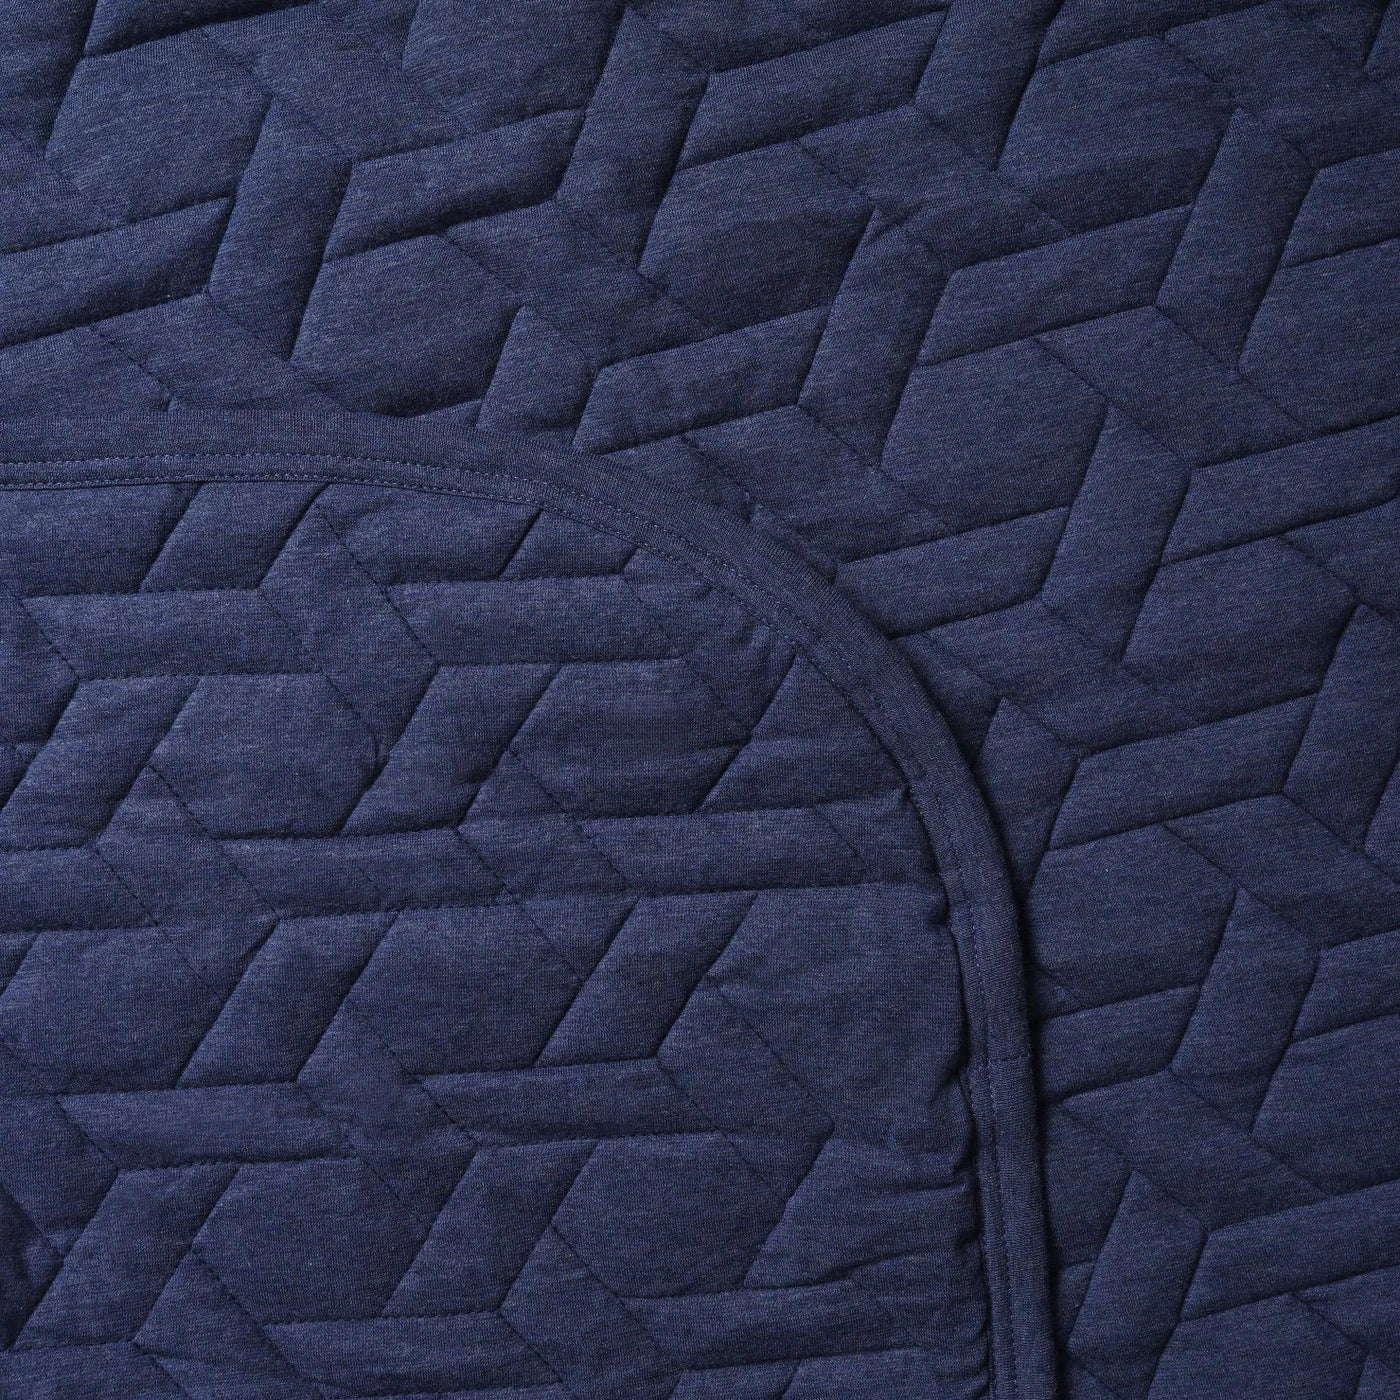 Cotton Quilted Blanket - Navy